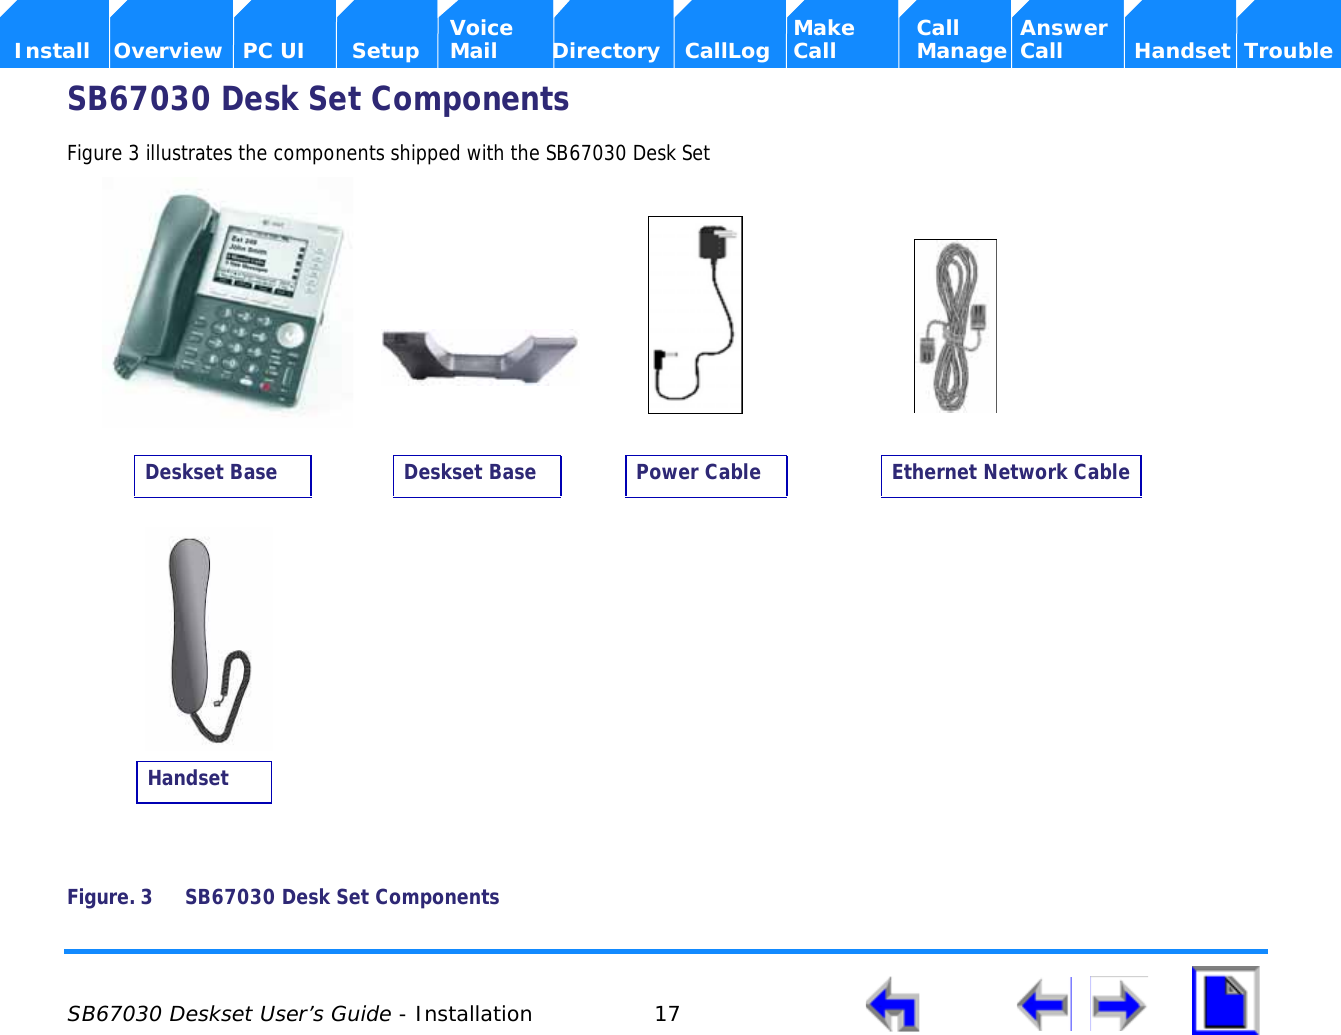  SB67030 Deskset User’s Guide - Installation 17    Voice Make Call Answer  Install Overview PC UI Setup Mail Directory CallLog Call Manage Call Handset TroubleSB67030 Desk Set ComponentsFigure 3 illustrates the components shipped with the SB67030 Desk SetFigure. 3 SB67030 Desk Set ComponentsDeskset Base Deskset Base Power Cable Ethernet Network CableHandset